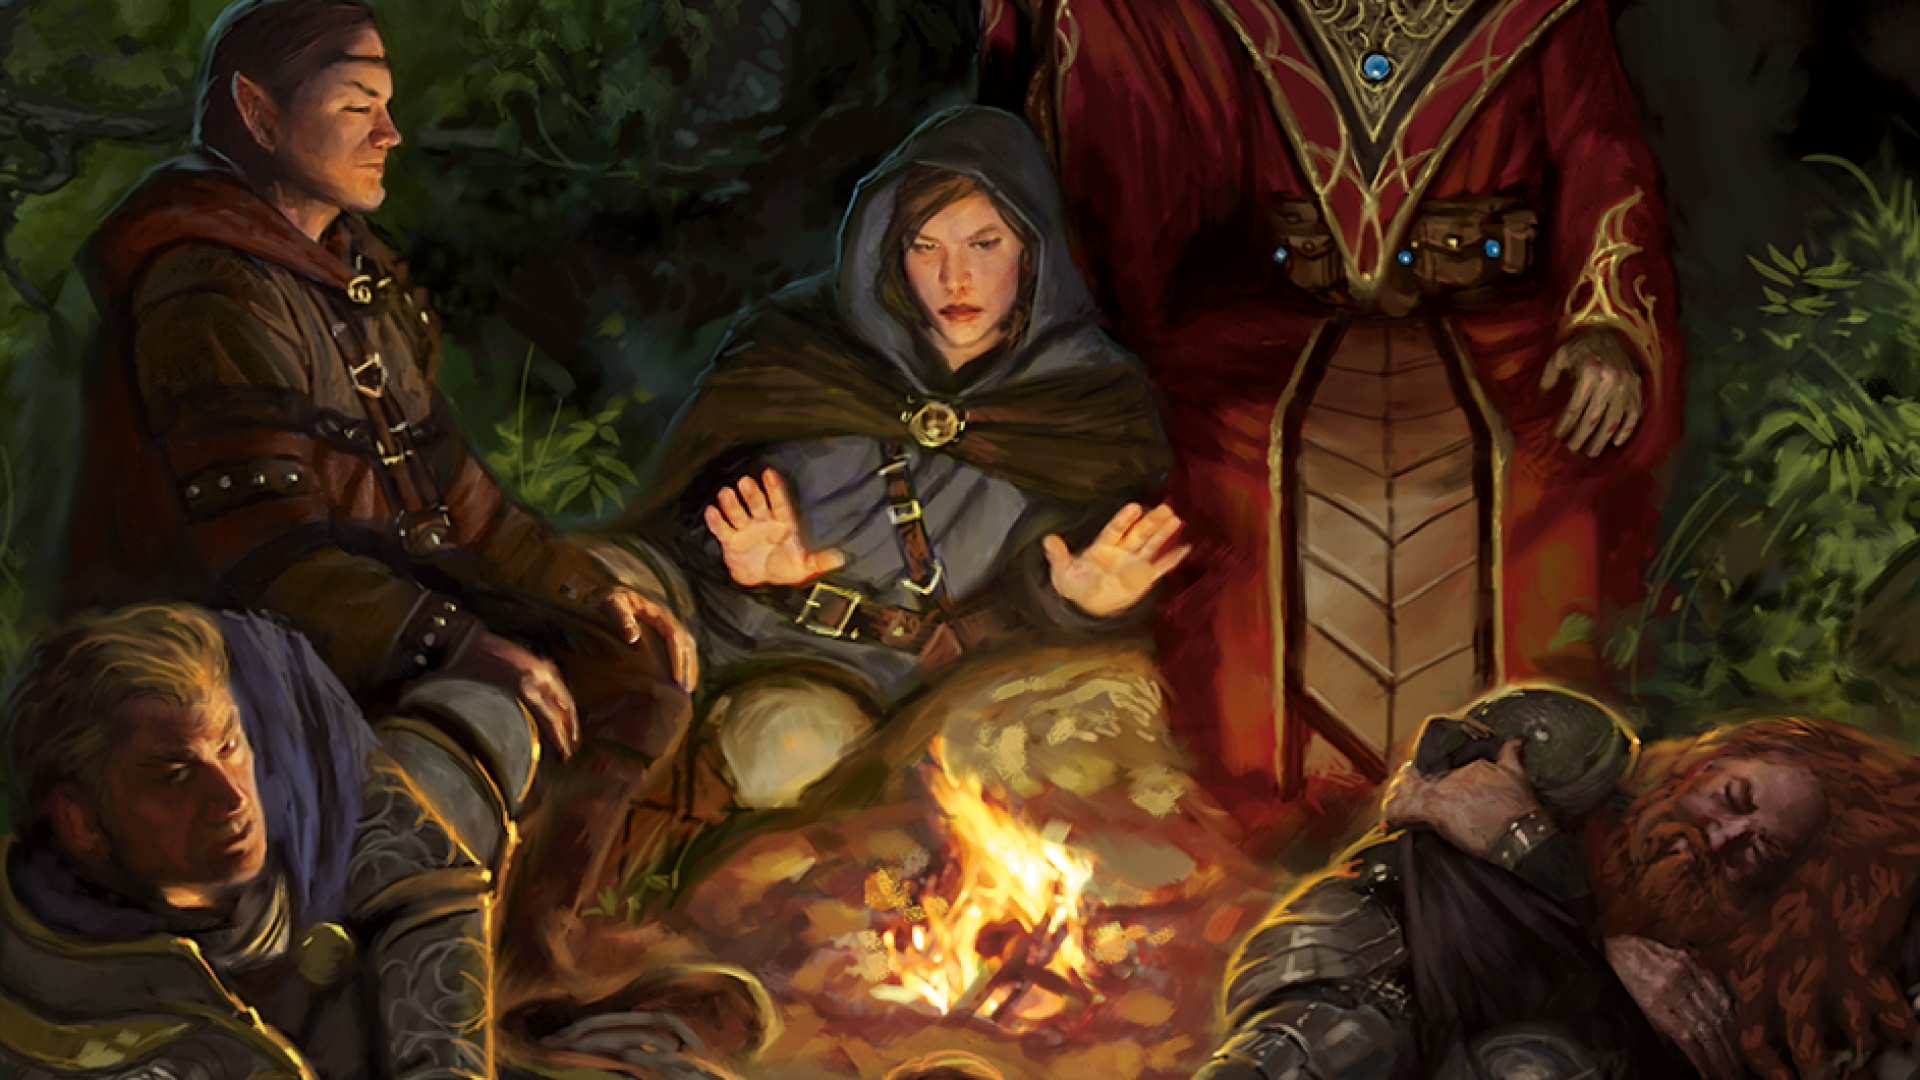 DnD how to be a DM - Wizards of the Coast art of an adventuring party resting around a campfire